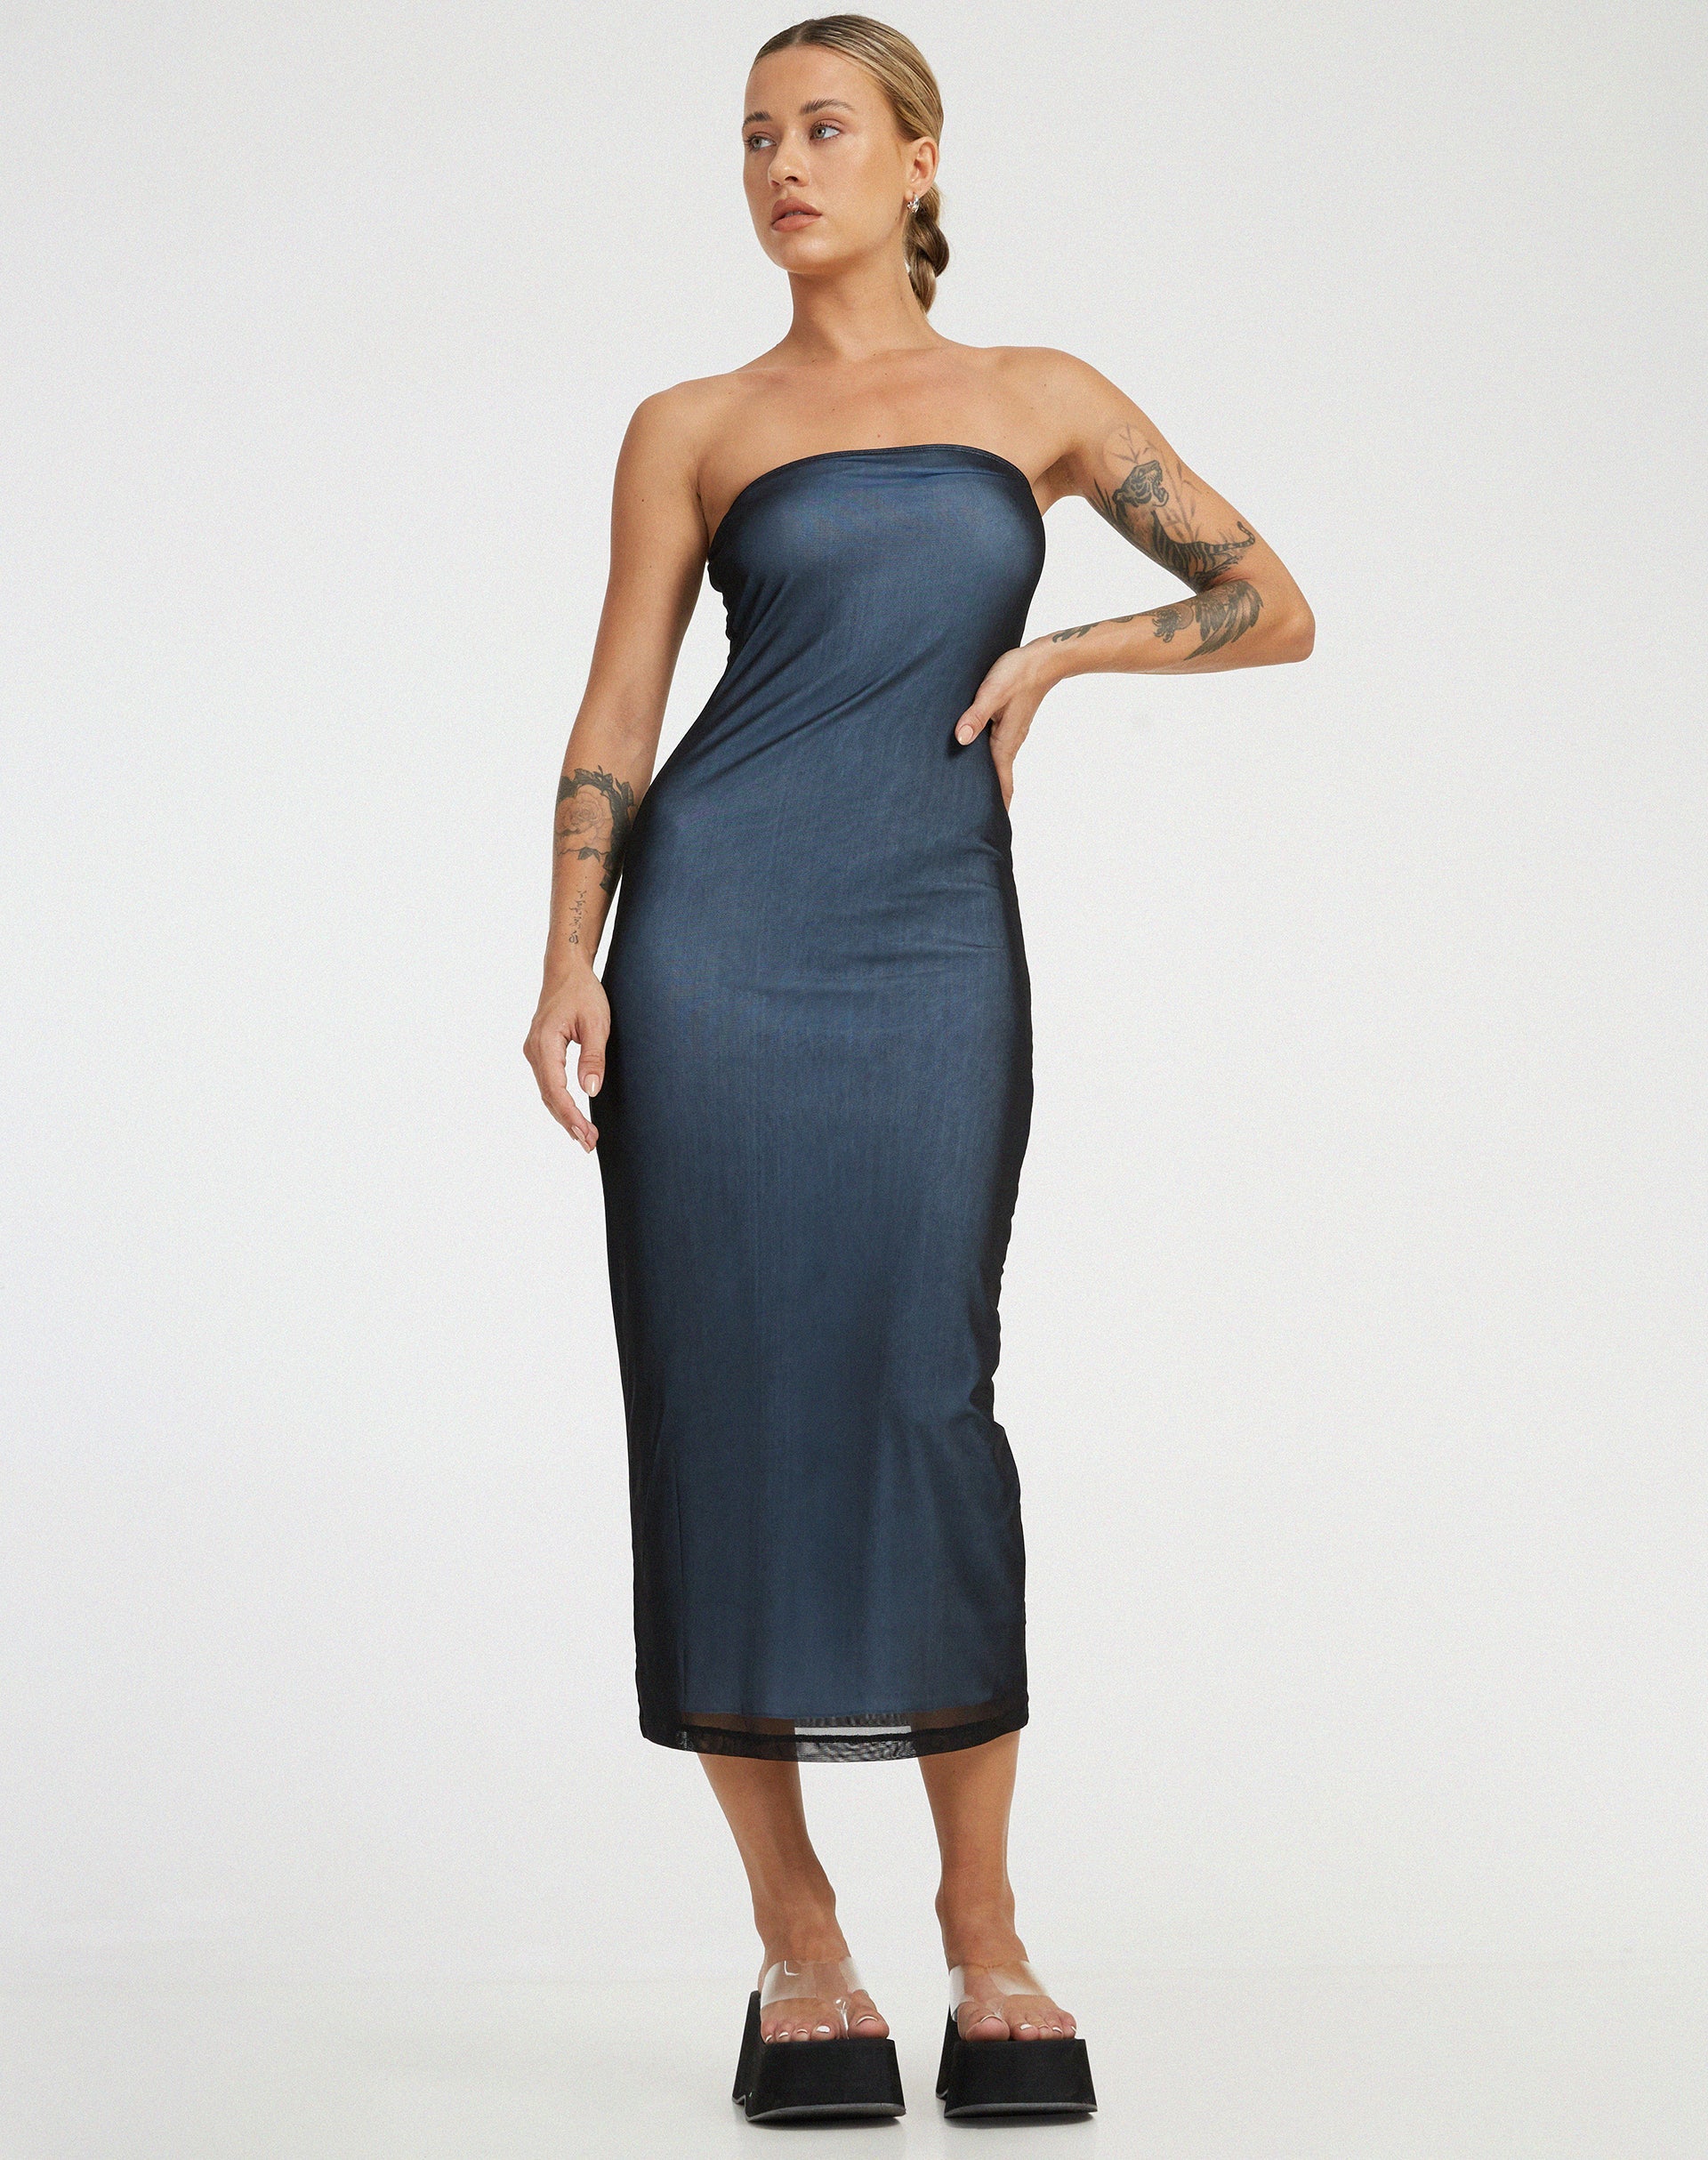 image of Rosbandi Midi Dress in Black with Baby Blue Lining